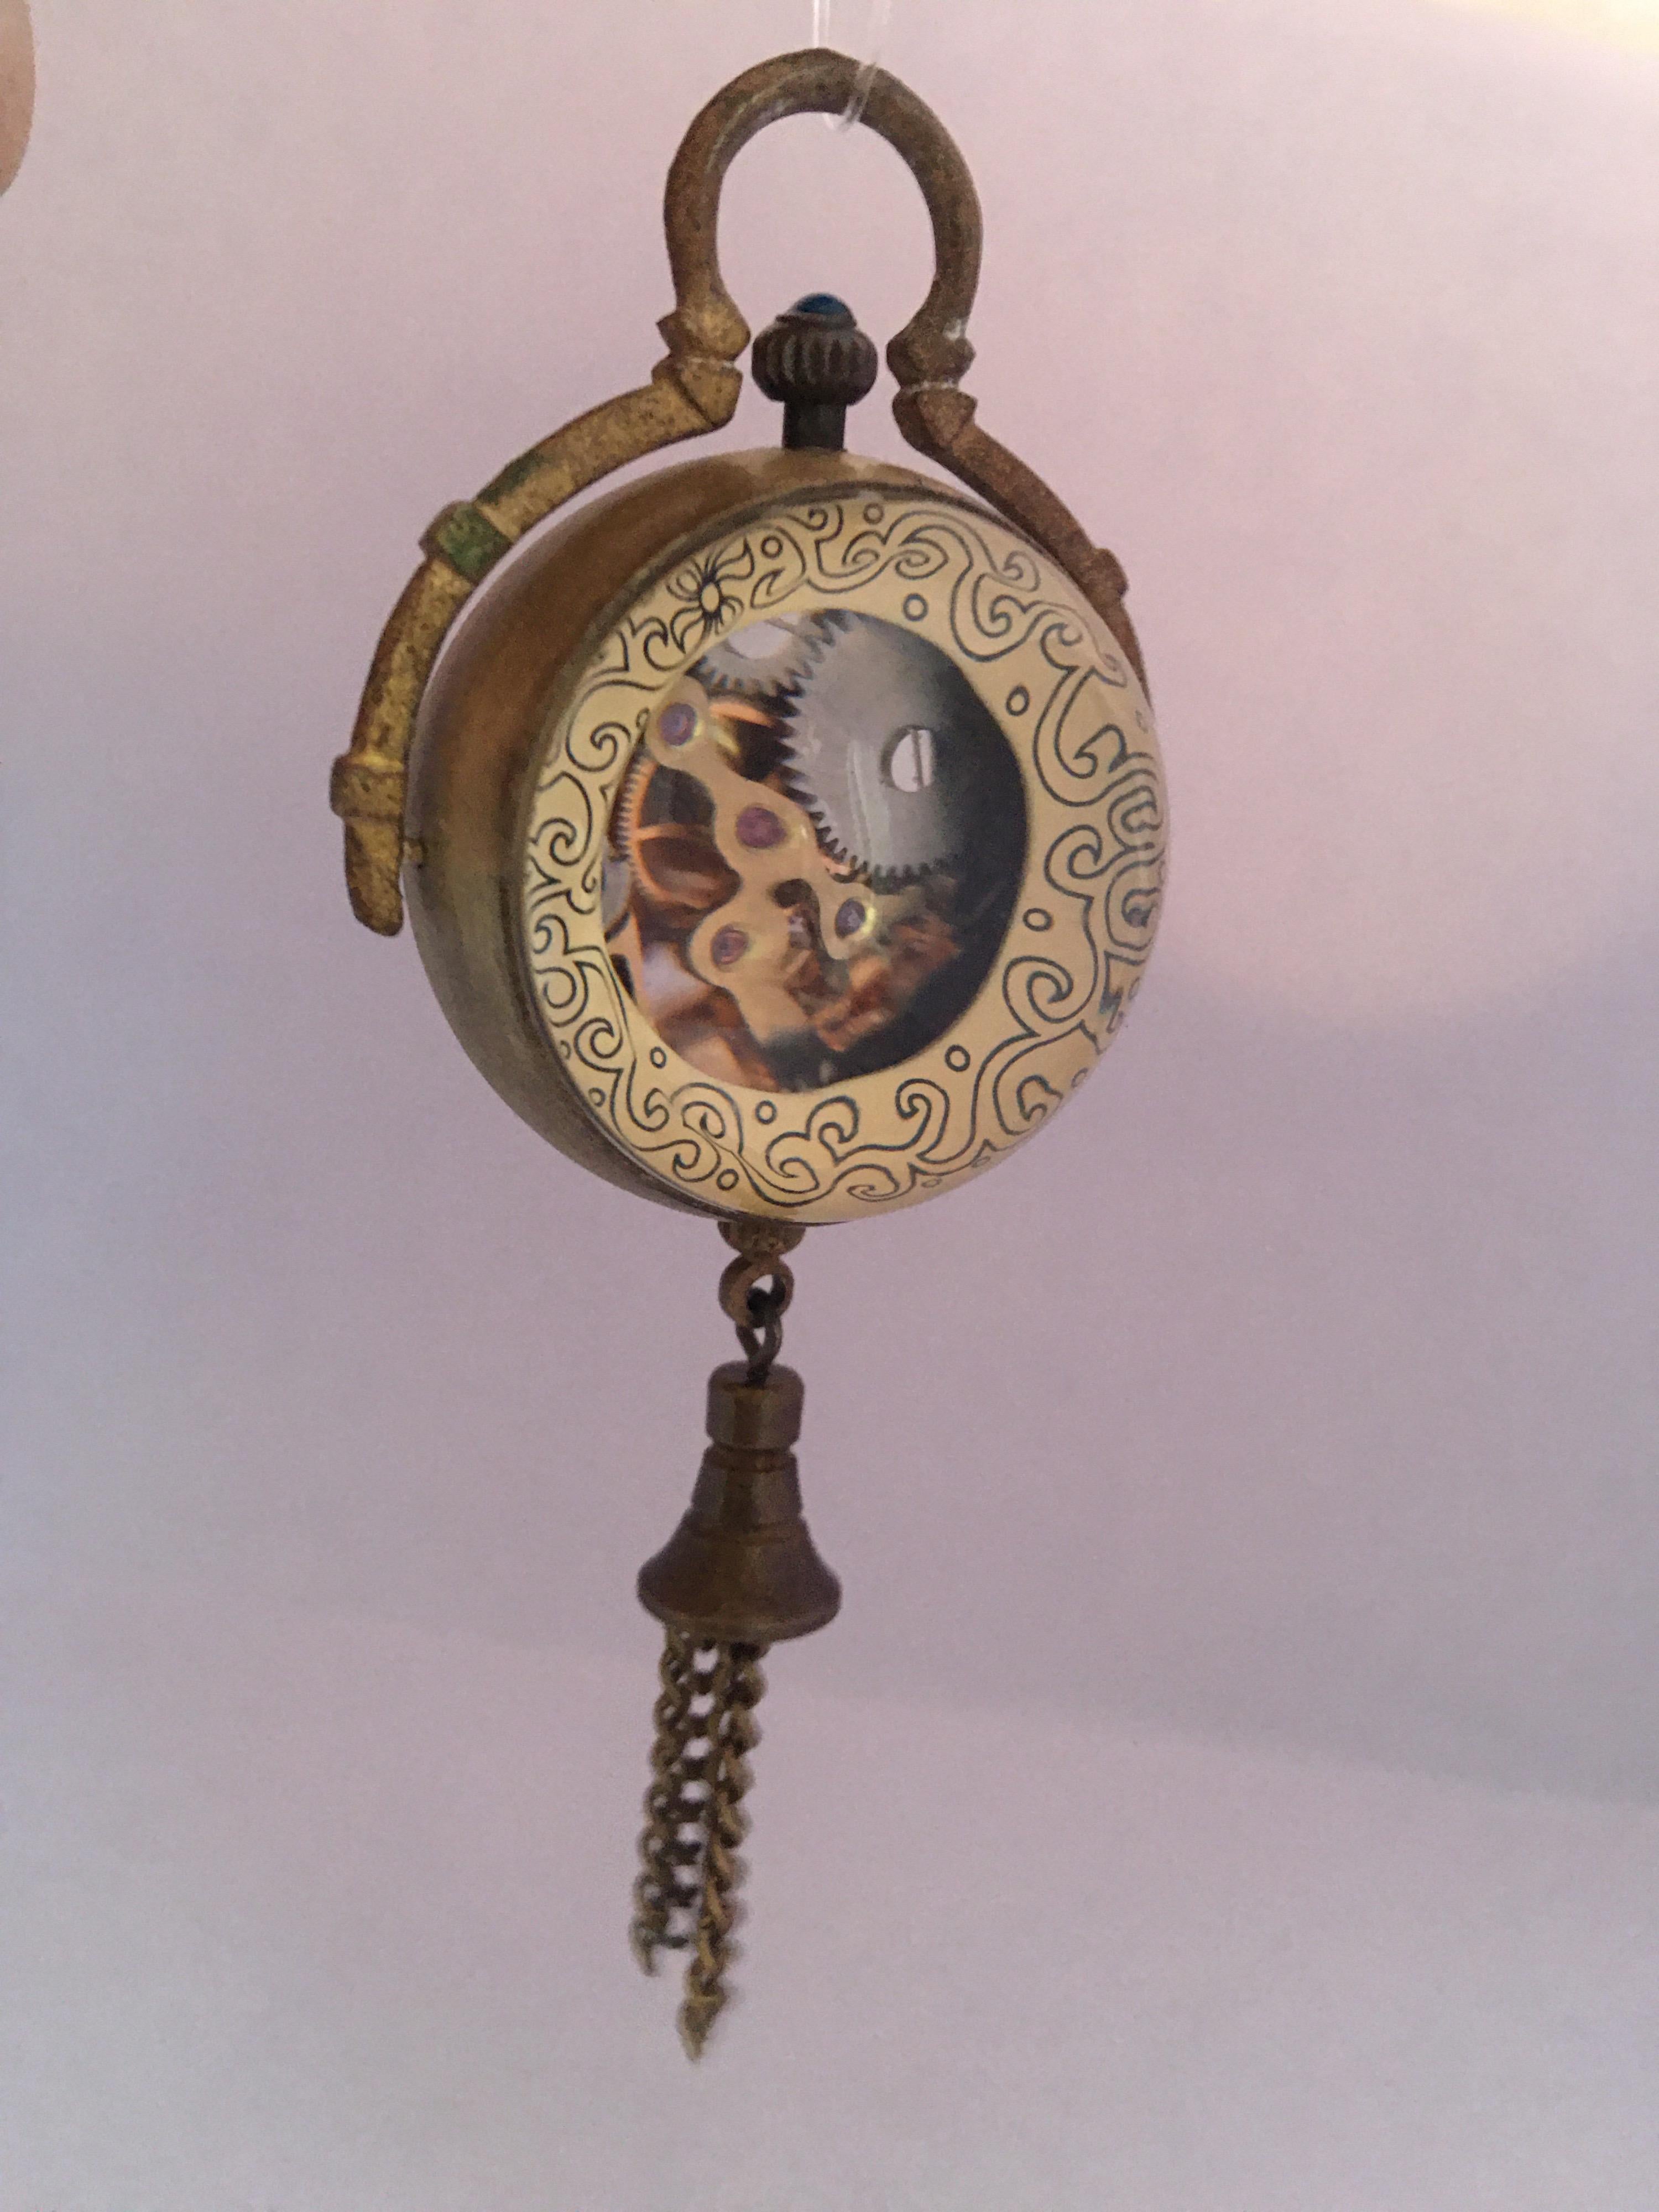 Vintage Mechanical Visible Escapement or Skeleton Pendant Ball Watch For Sale 8